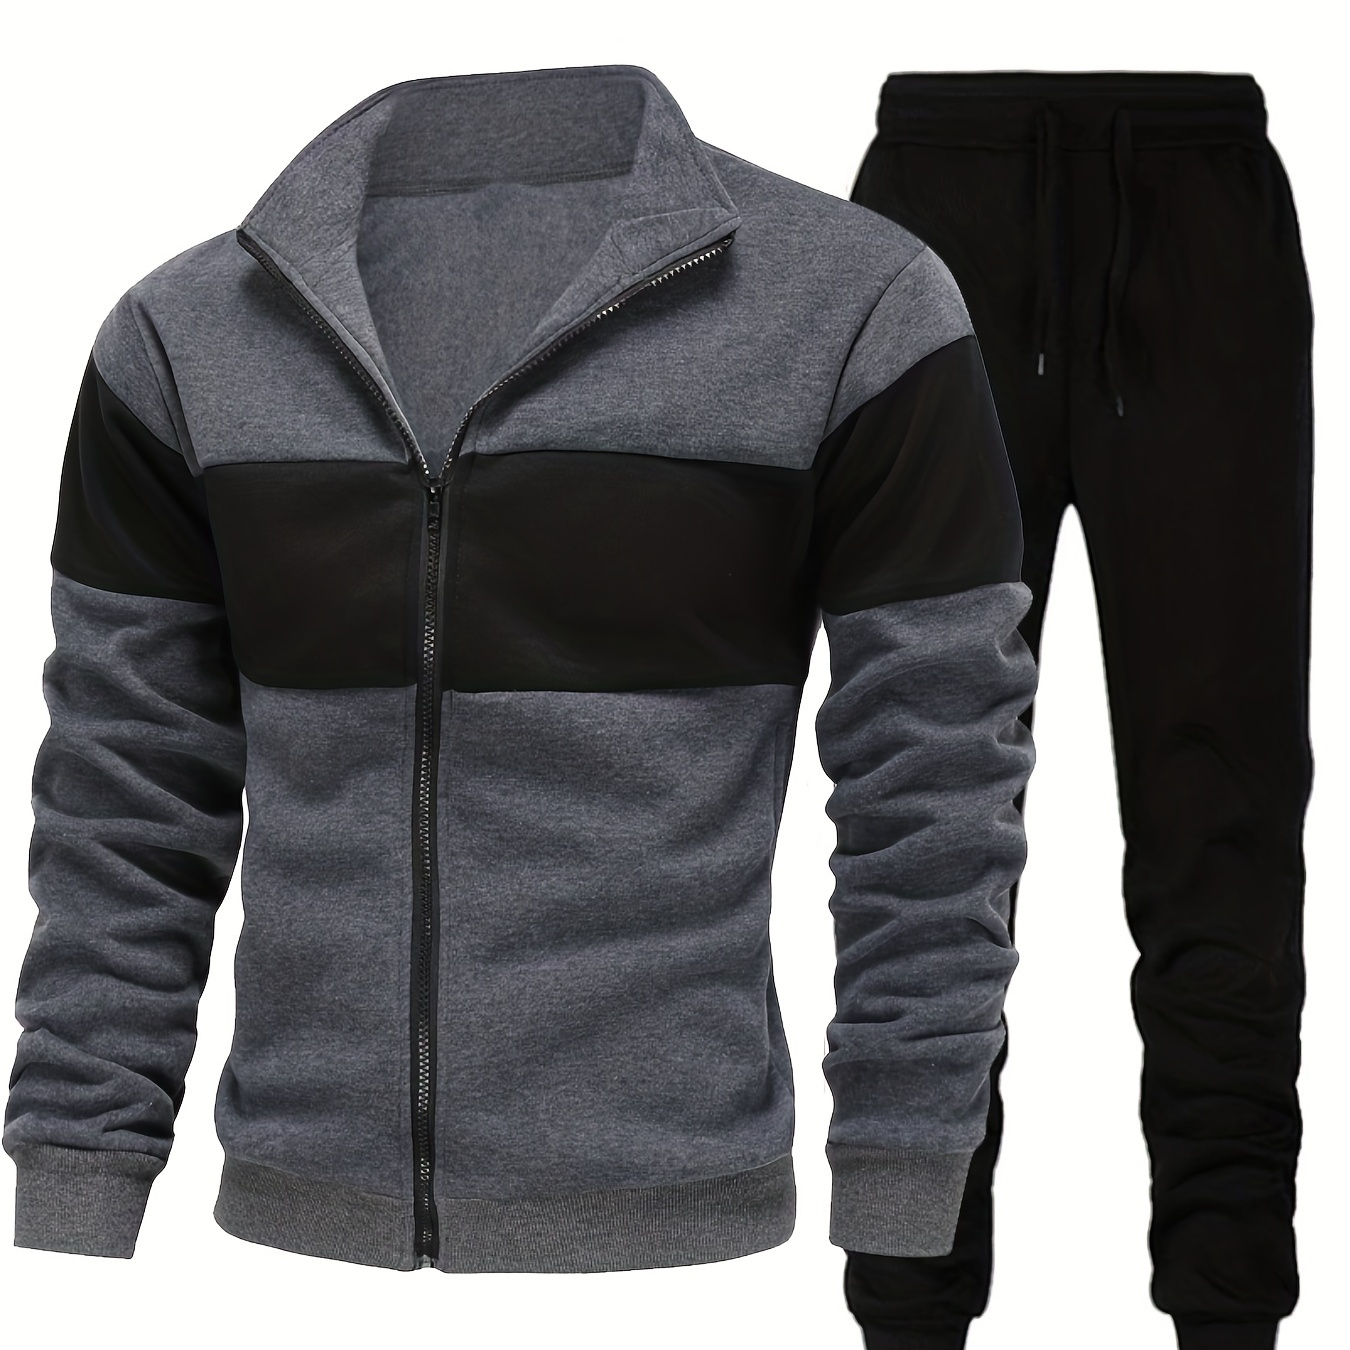 

Classic Men's Color Block Athletic 2pcs Tracksuit Set Casual Full-zip Sweatsuits Long Sleeve Jacket And Jogging Pants Set For Gym Workout Running